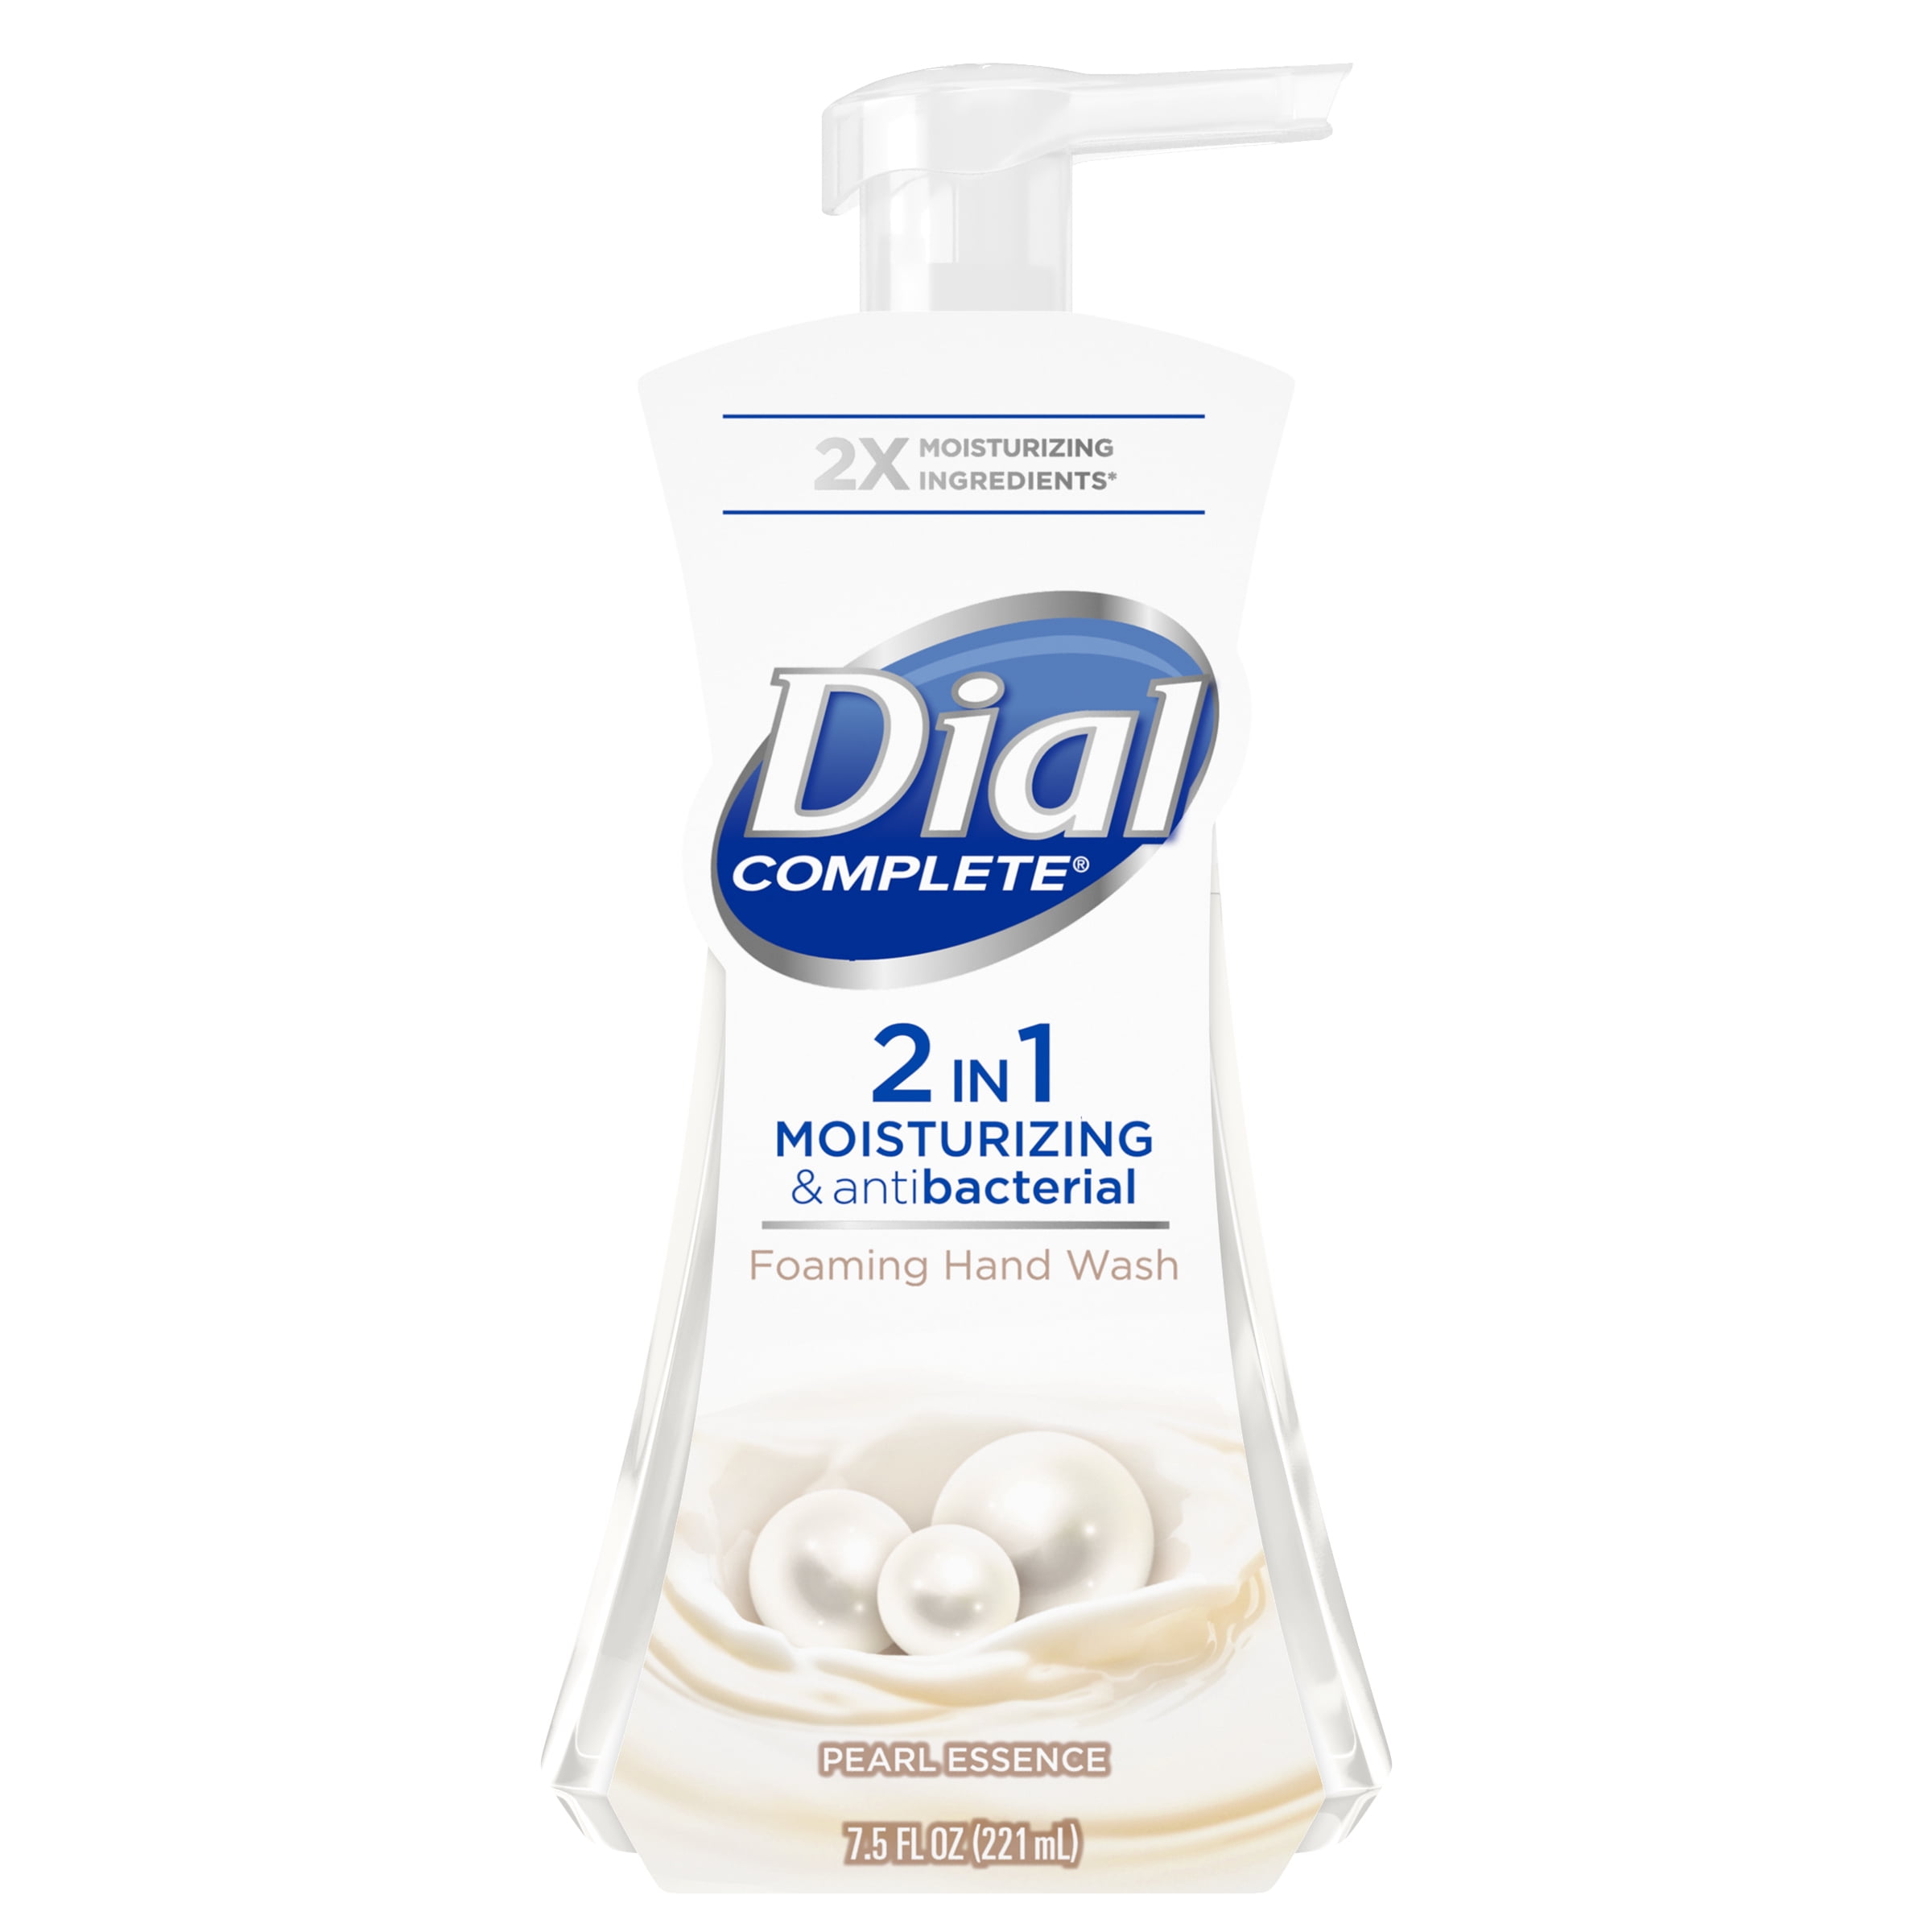 Dial Complete 2 in 1 Moisturizing & Antibacterial Foaming Hand Wash